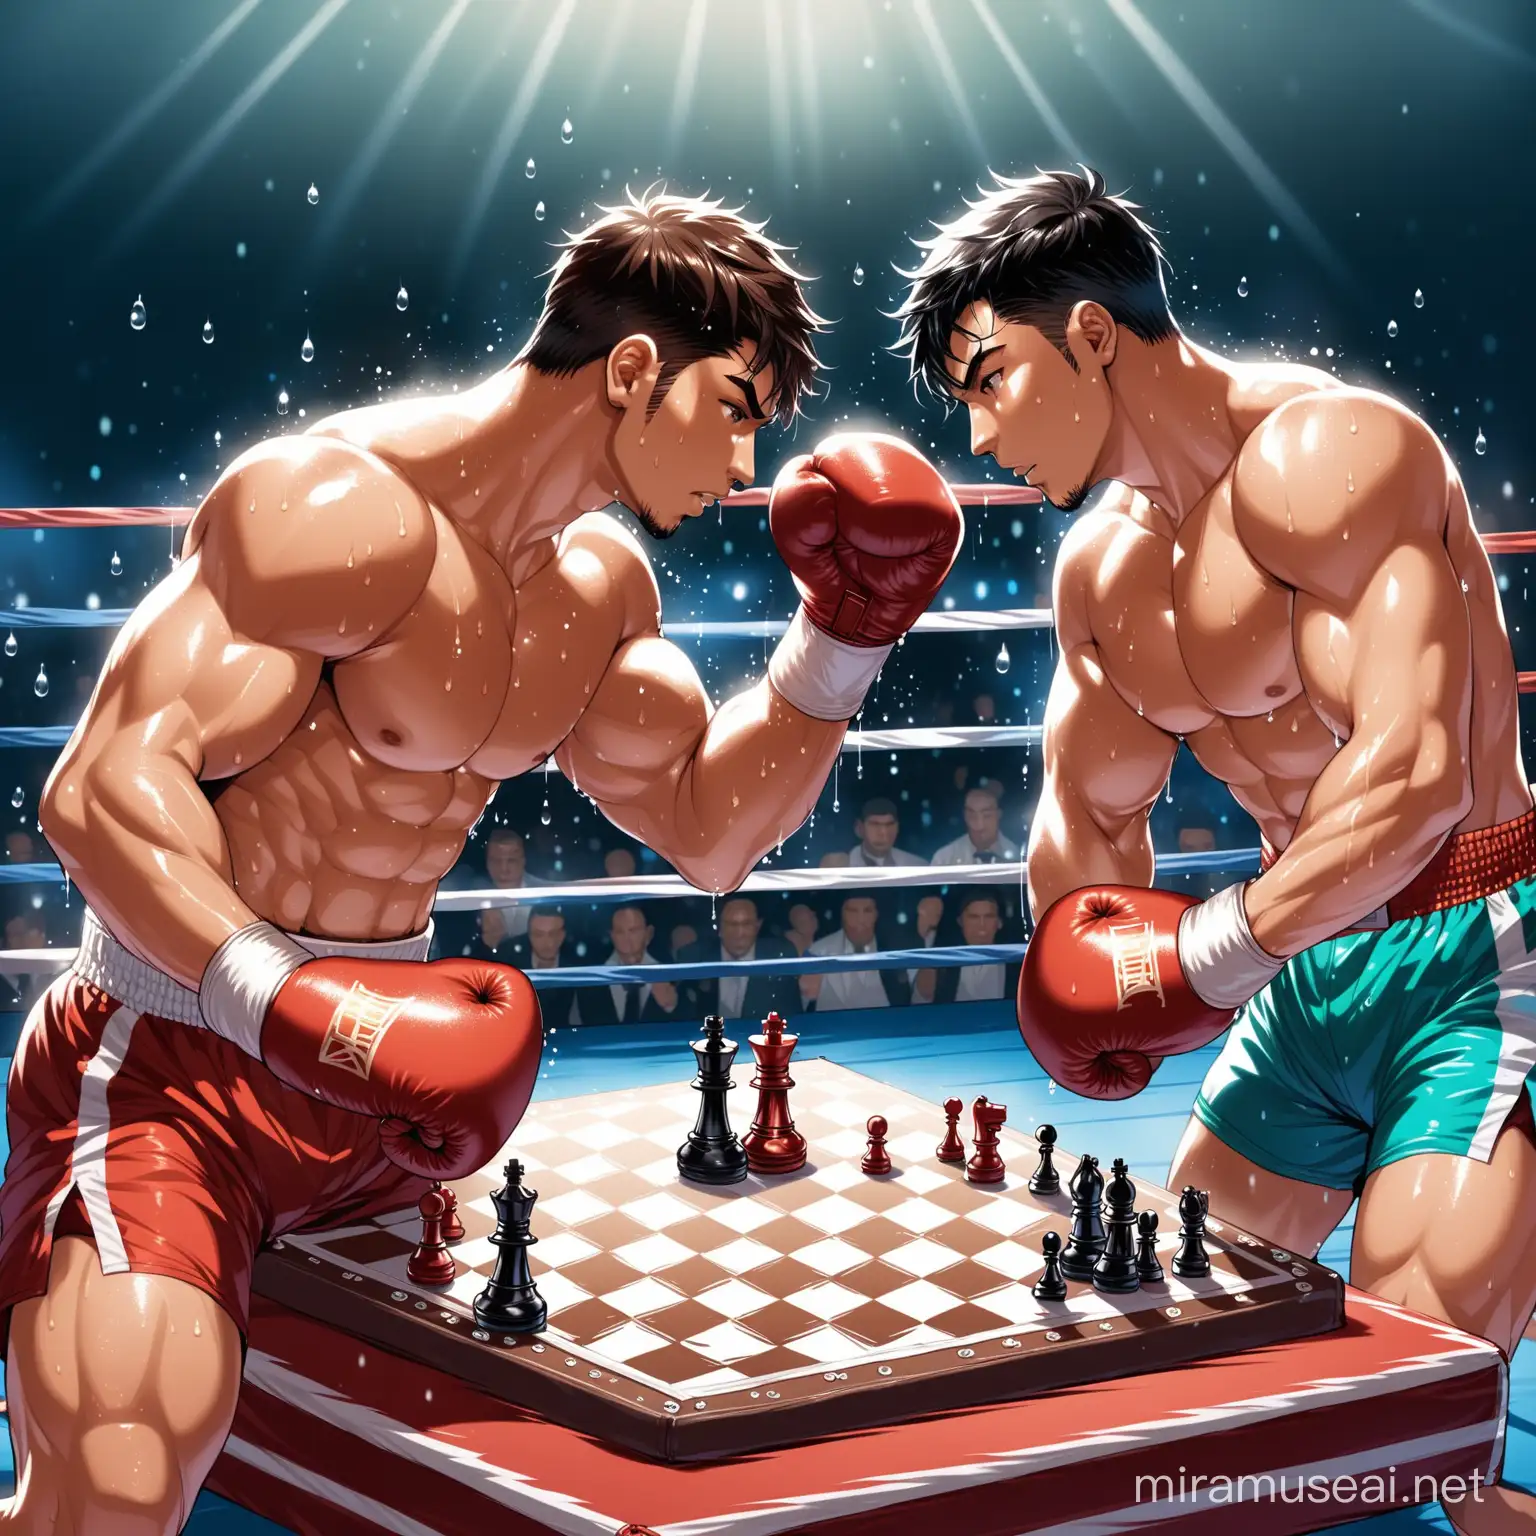 Super sexy buff boys boxing over a chess board in the middle of a boxing ring, they are glistening with sweat droplets and the chessboard has tiny chess pieces that are also boxing